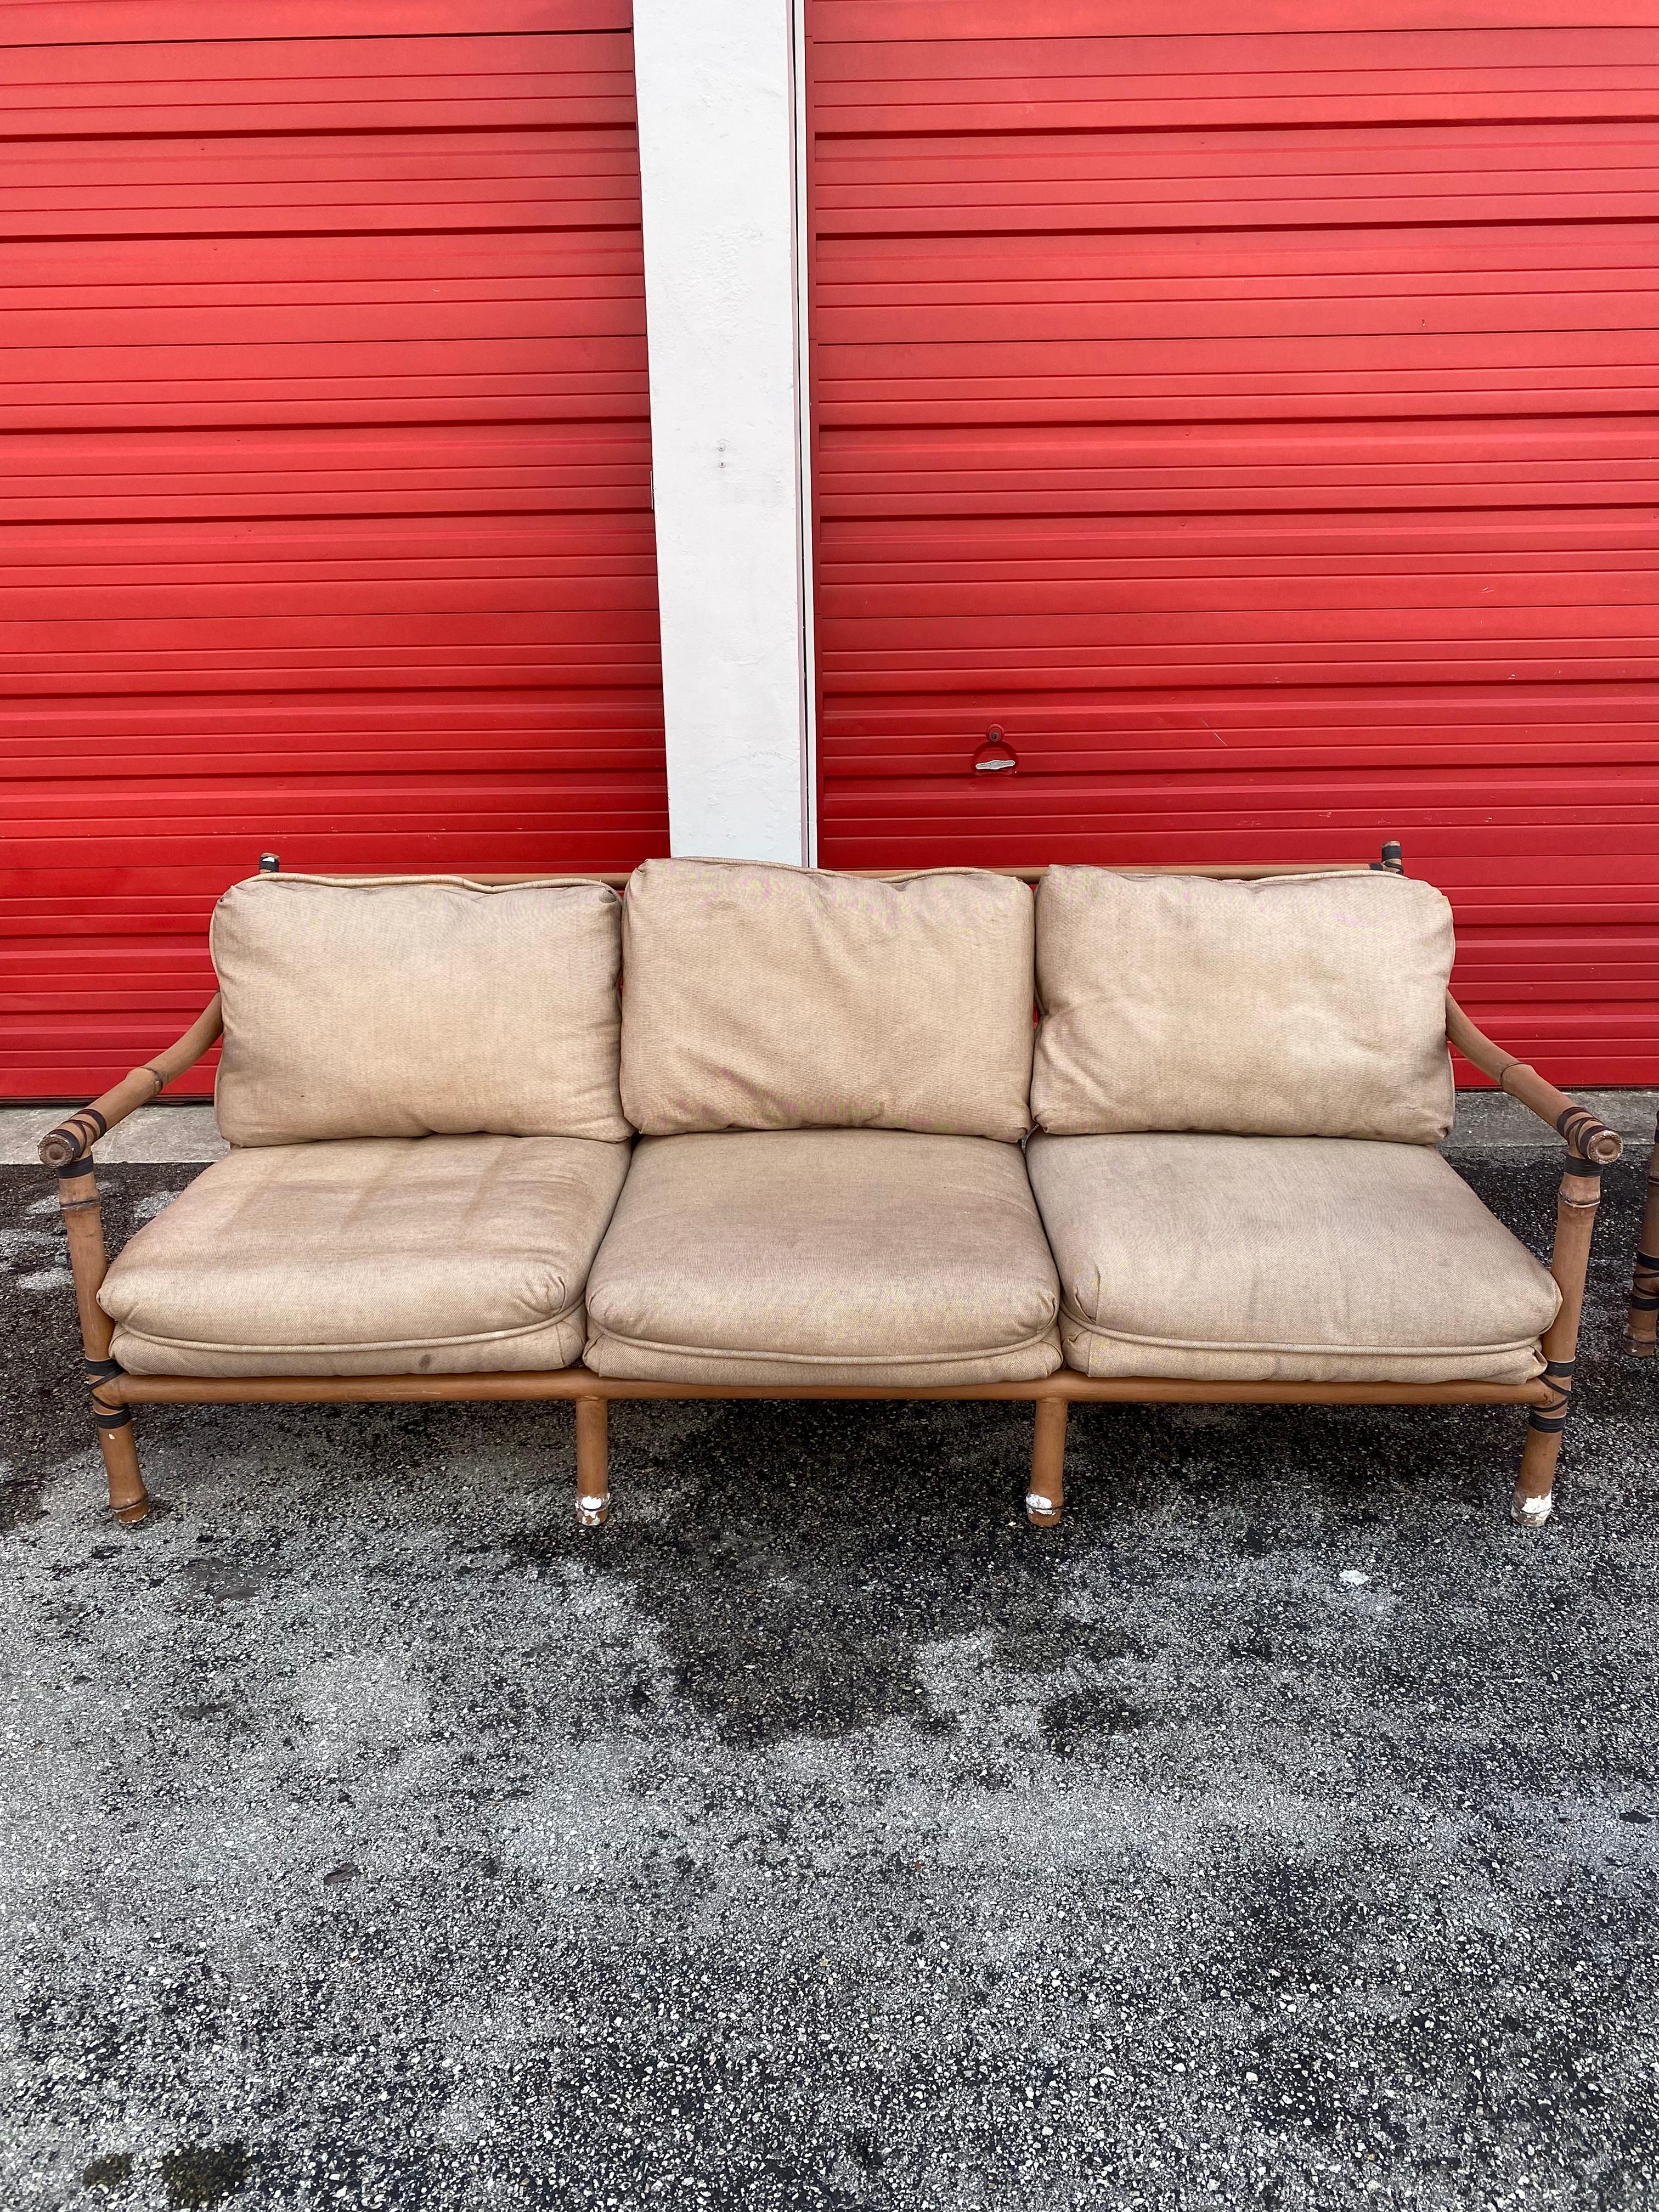 1970s  McQuire Target Back Faux Rattan Aluminum Sofa Chair Set In Good Condition For Sale In Fort Lauderdale, FL